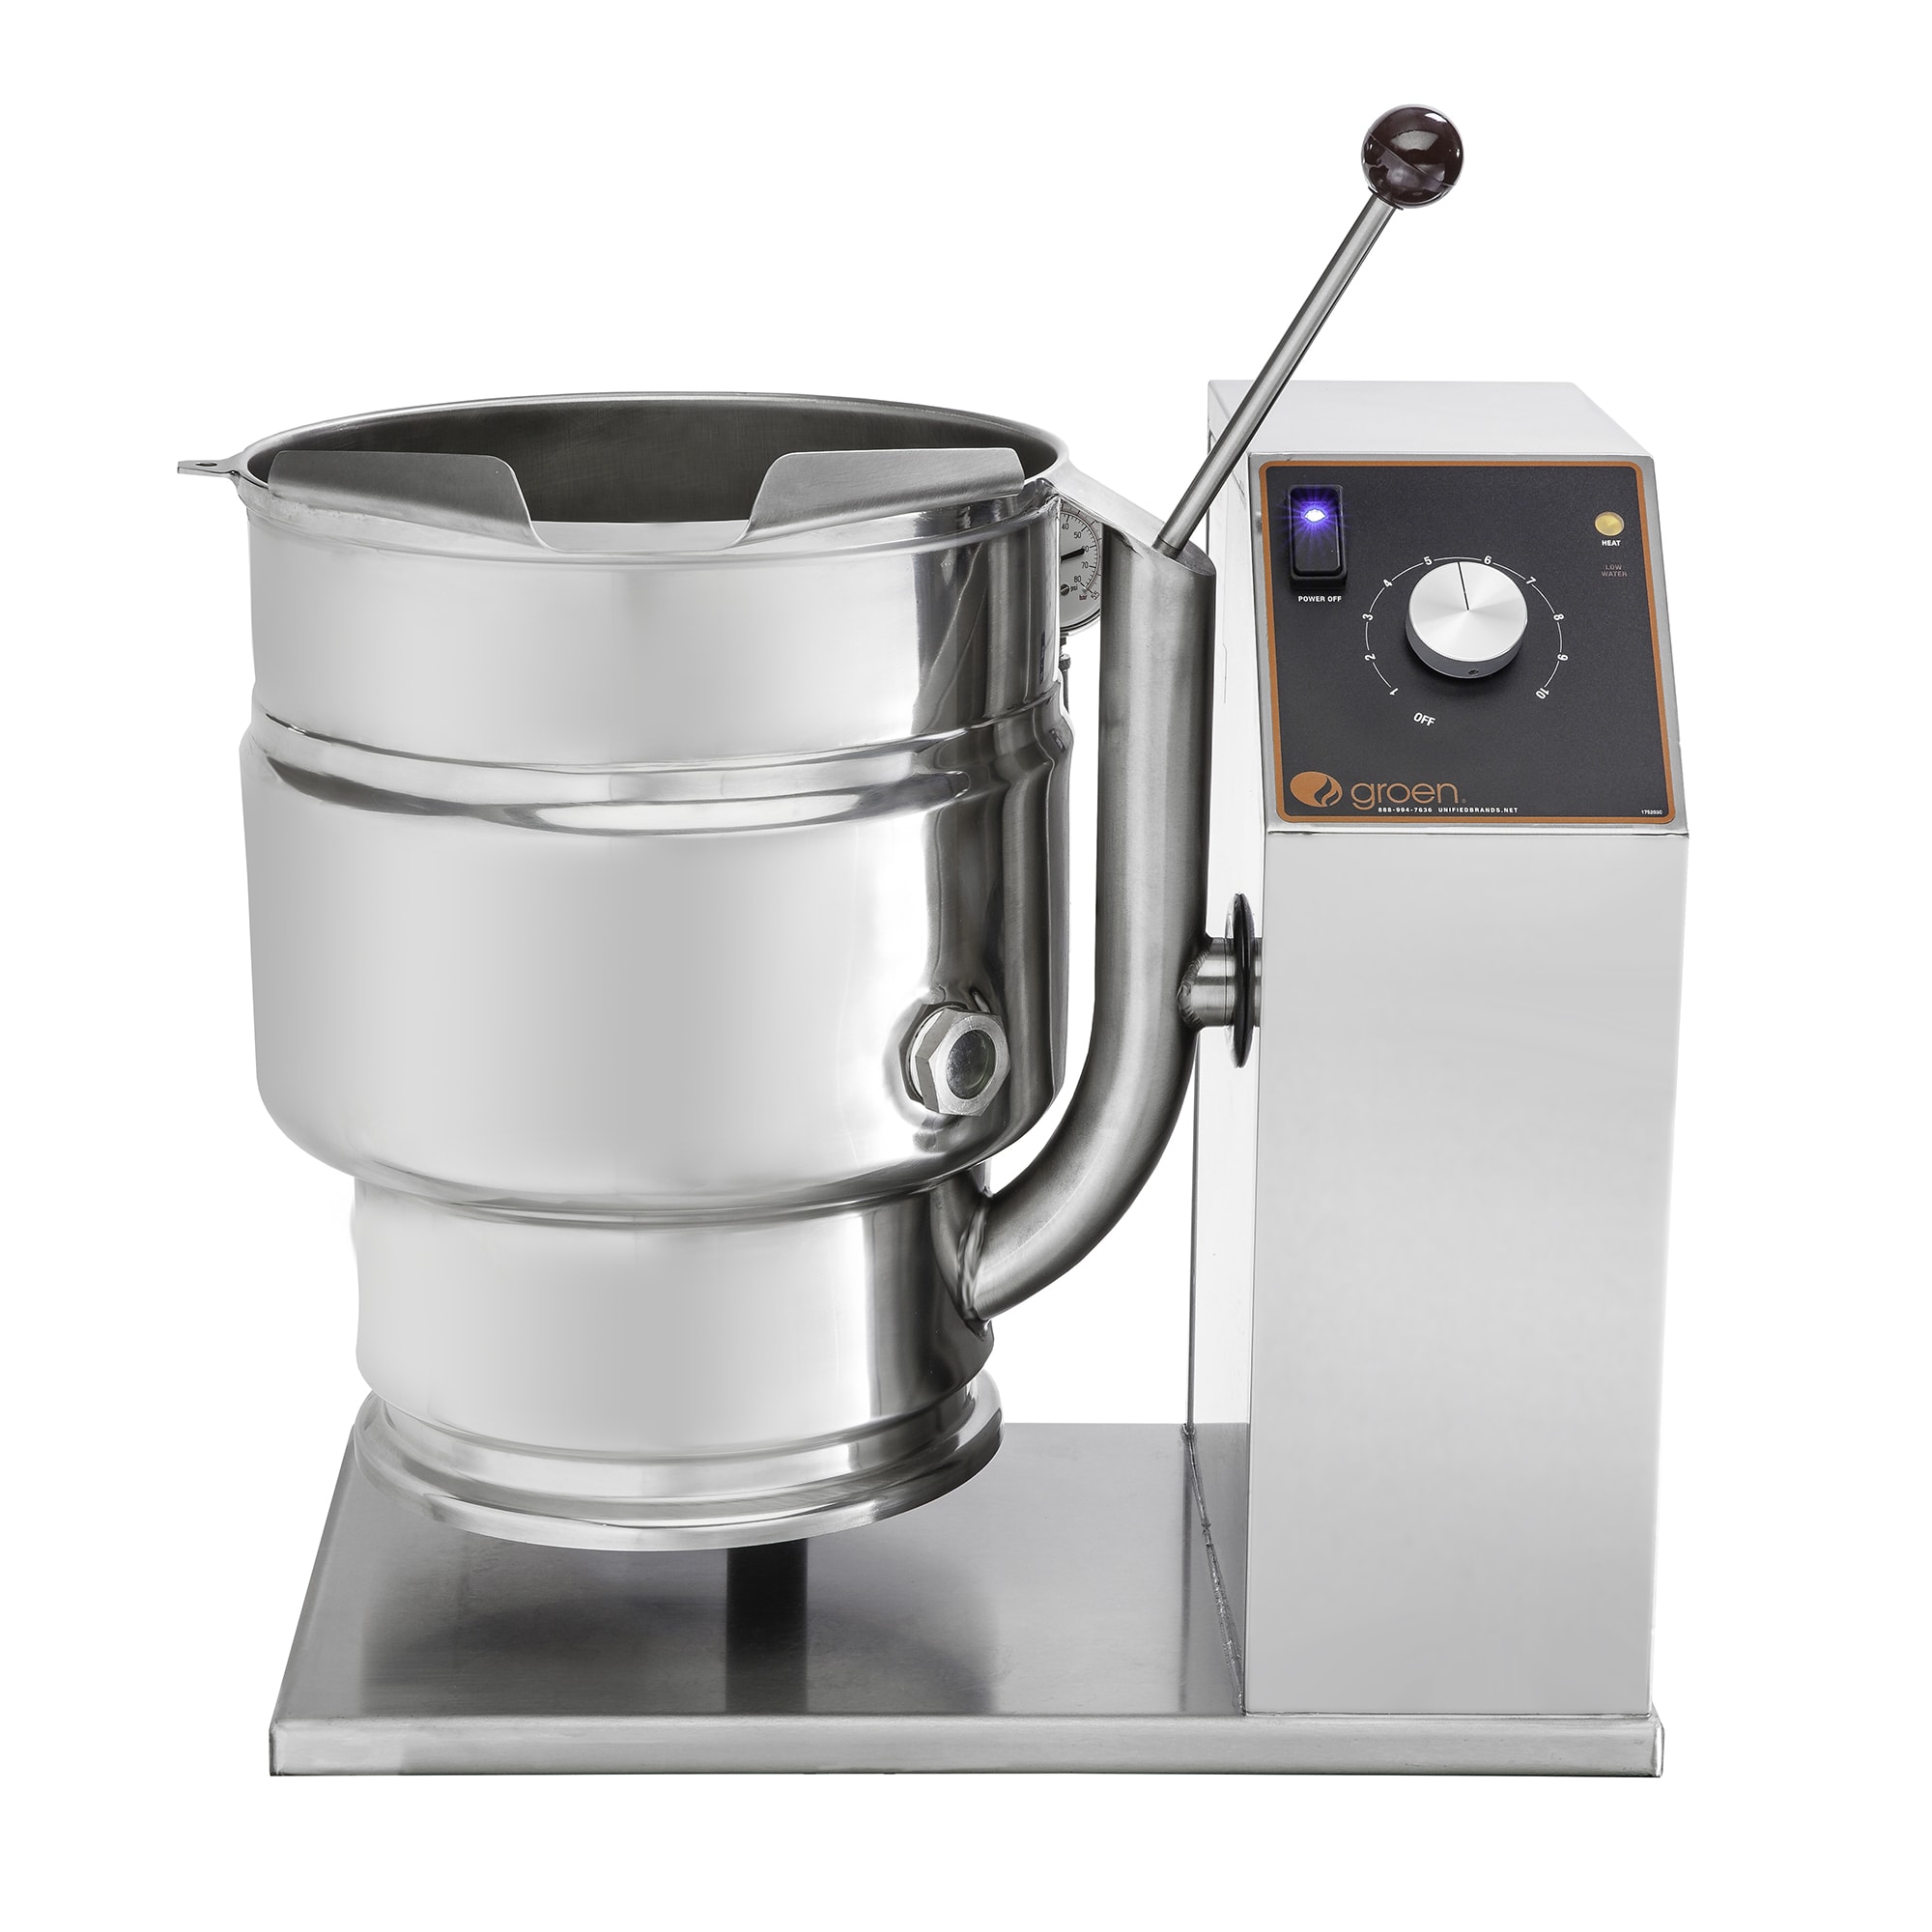 Tilting Kettle, electric, 30 gallon capacity, full jacket, thermostatic  control, crank tilt with